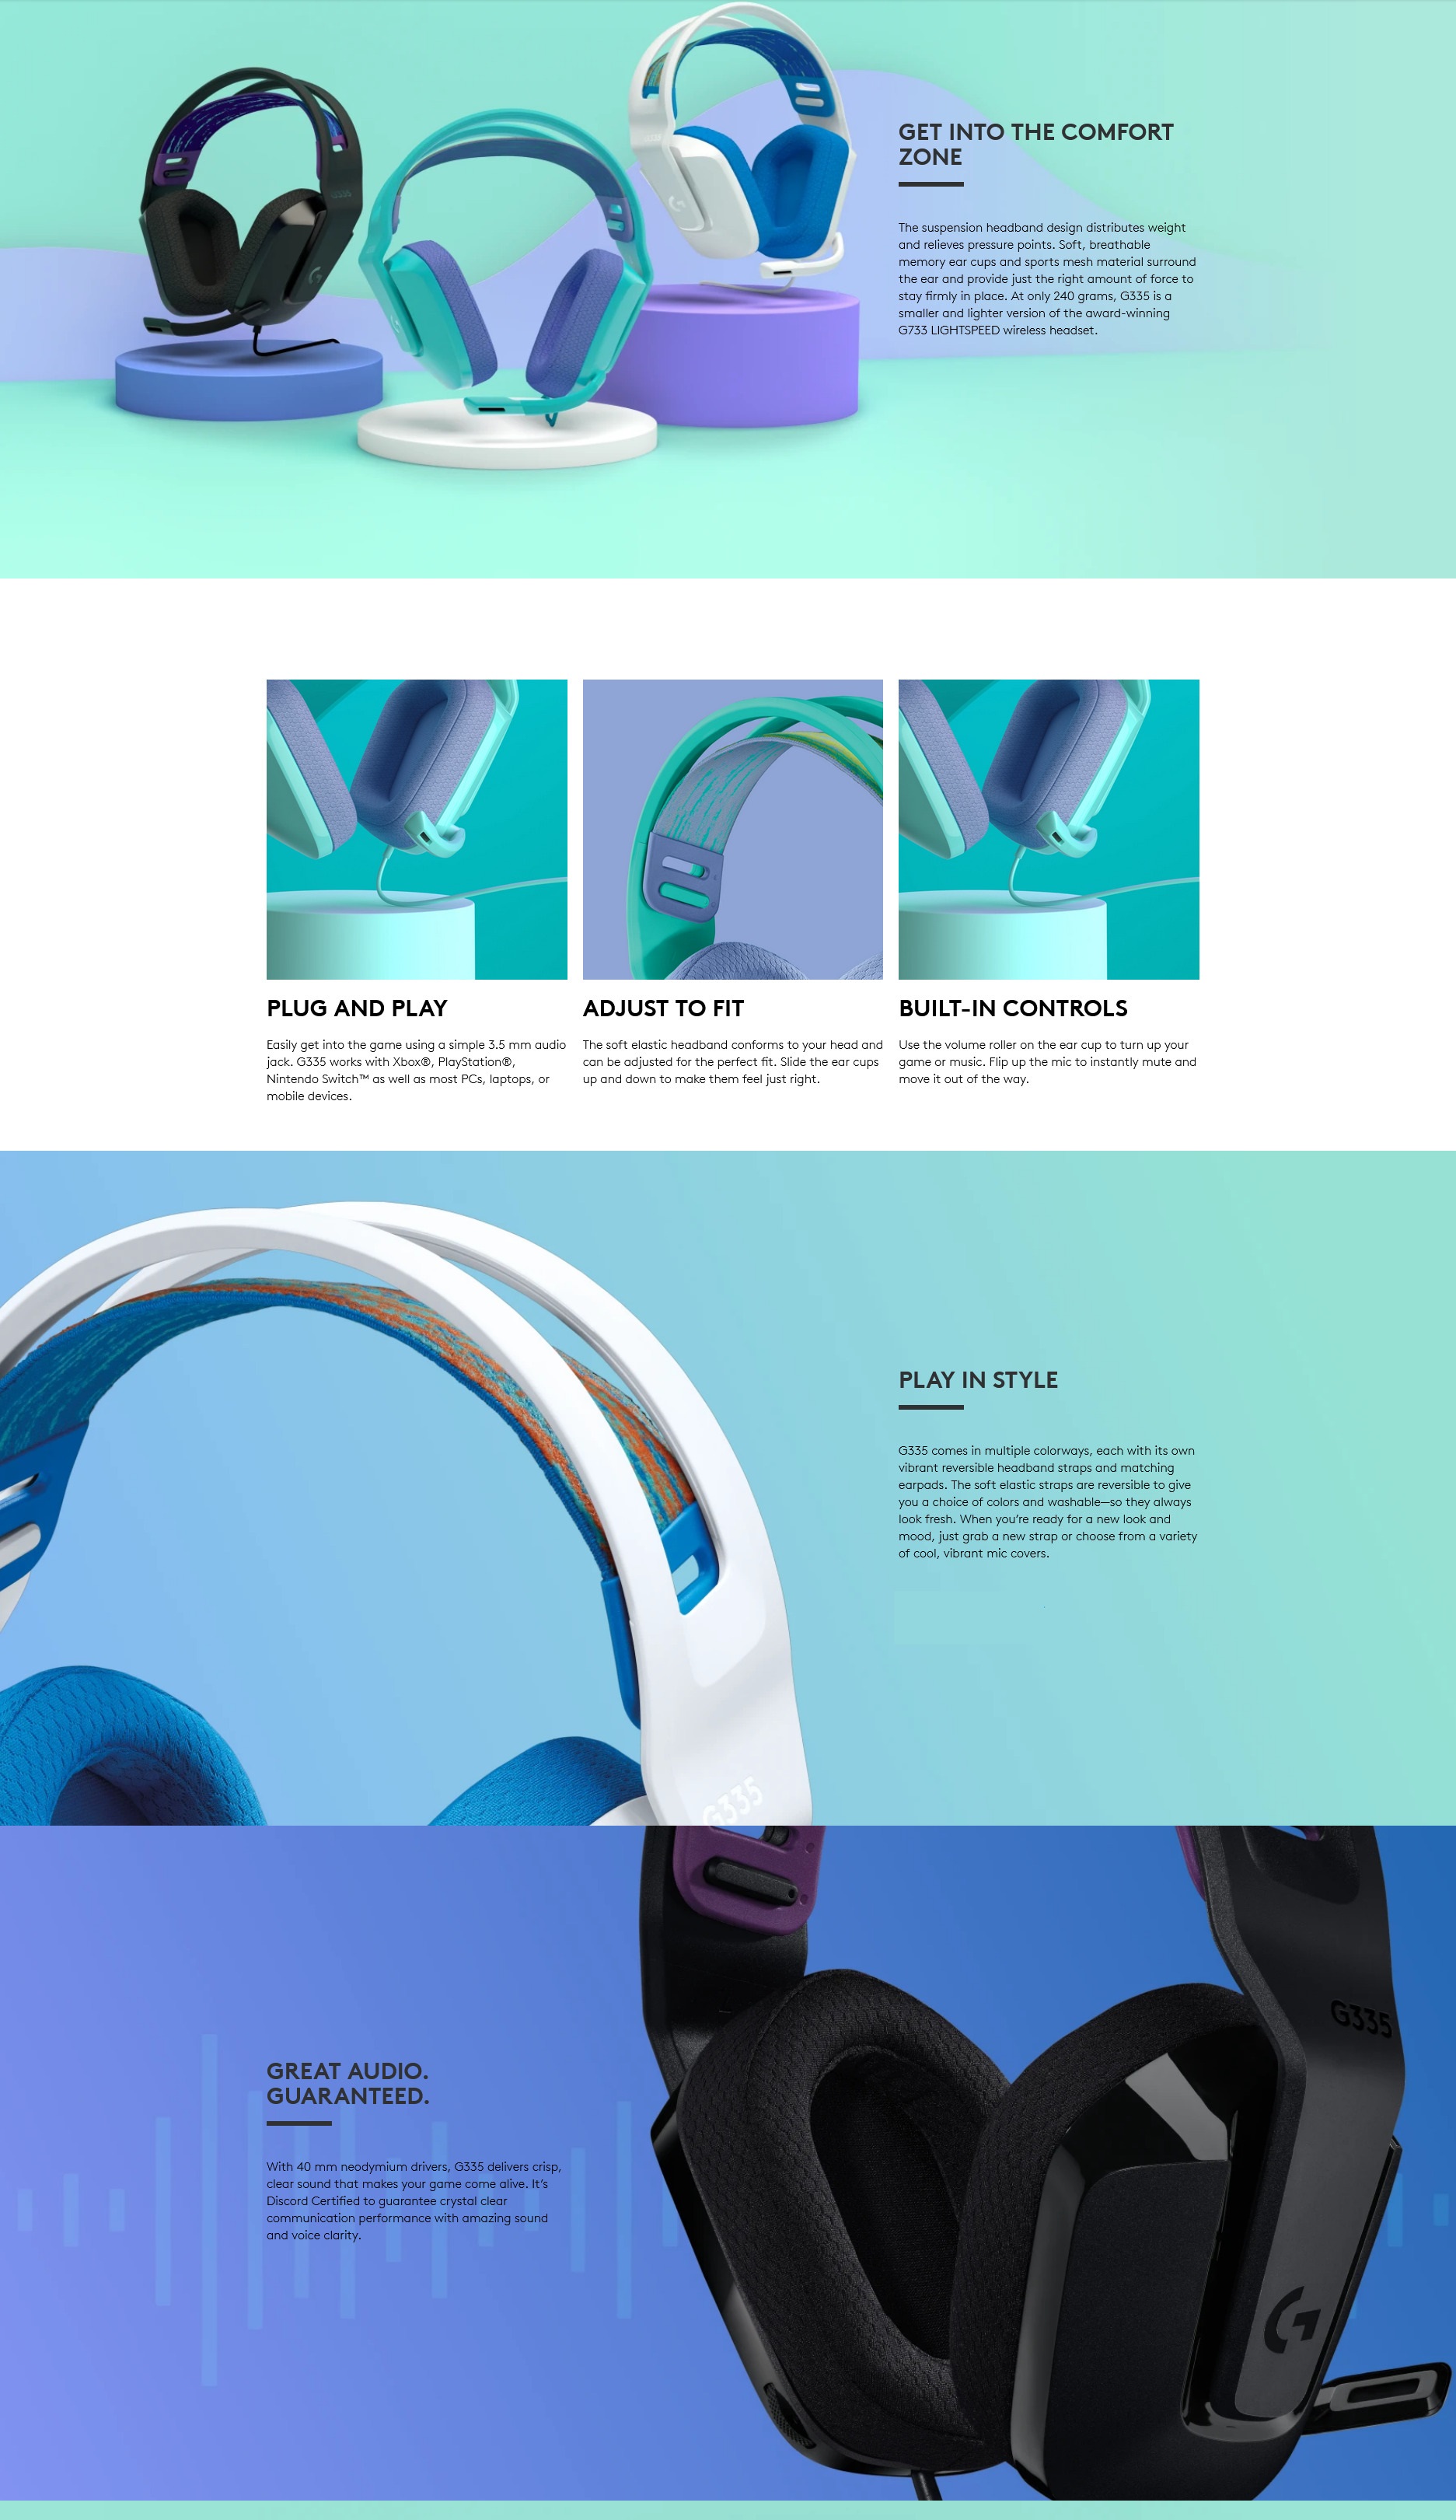 A large marketing image providing additional information about the product Logitech G335 Wired Gaming Headset - Mint - Additional alt info not provided